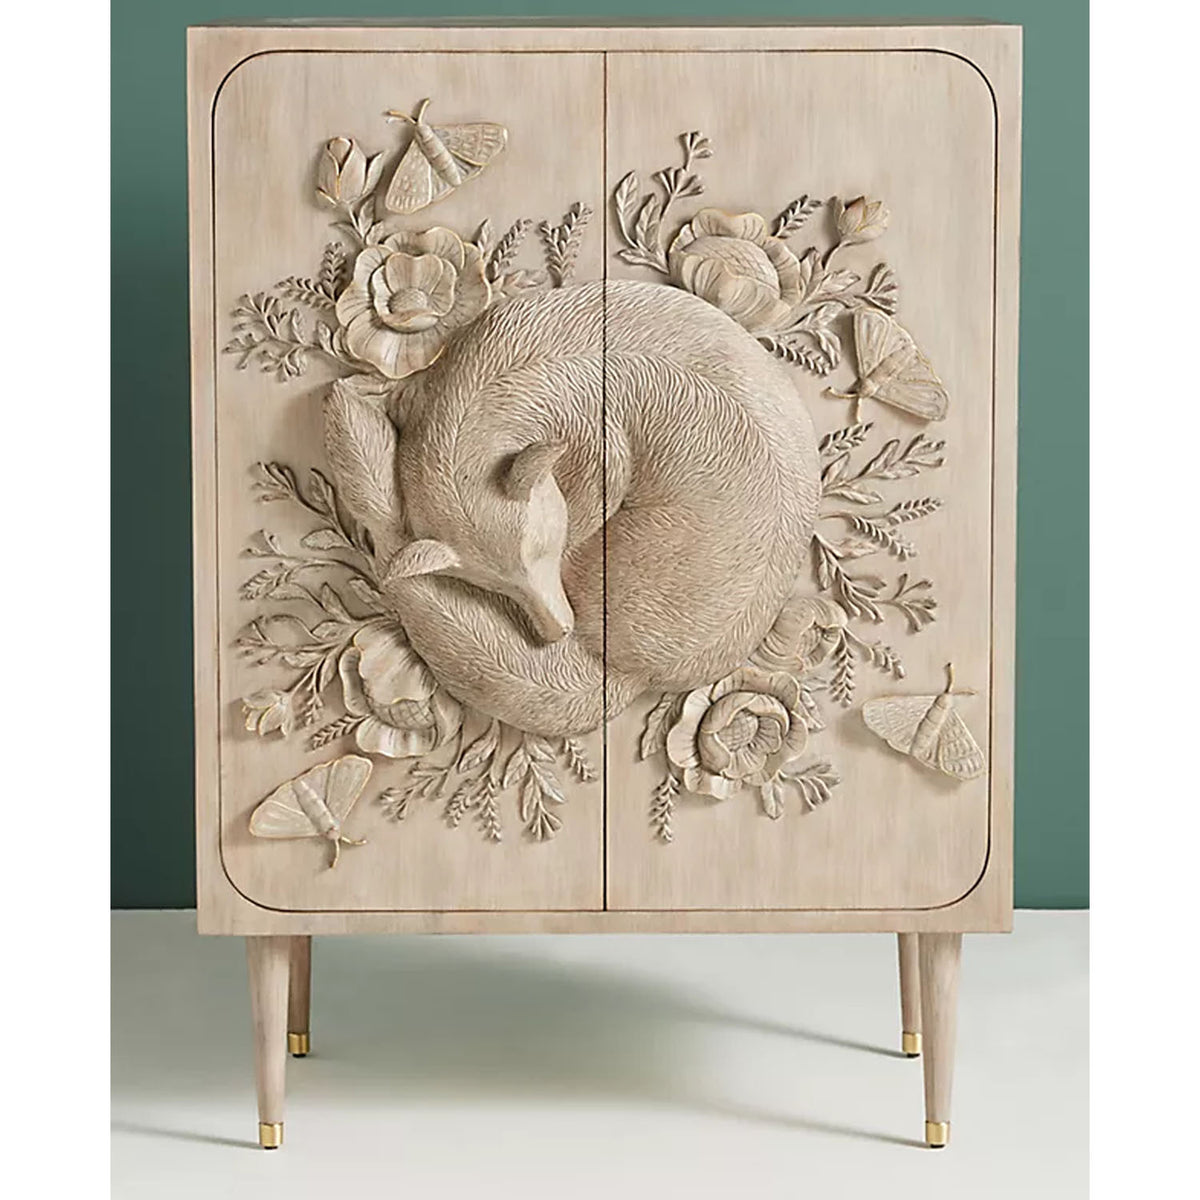 Kojo Nature and Life Cabinet - Notbrand